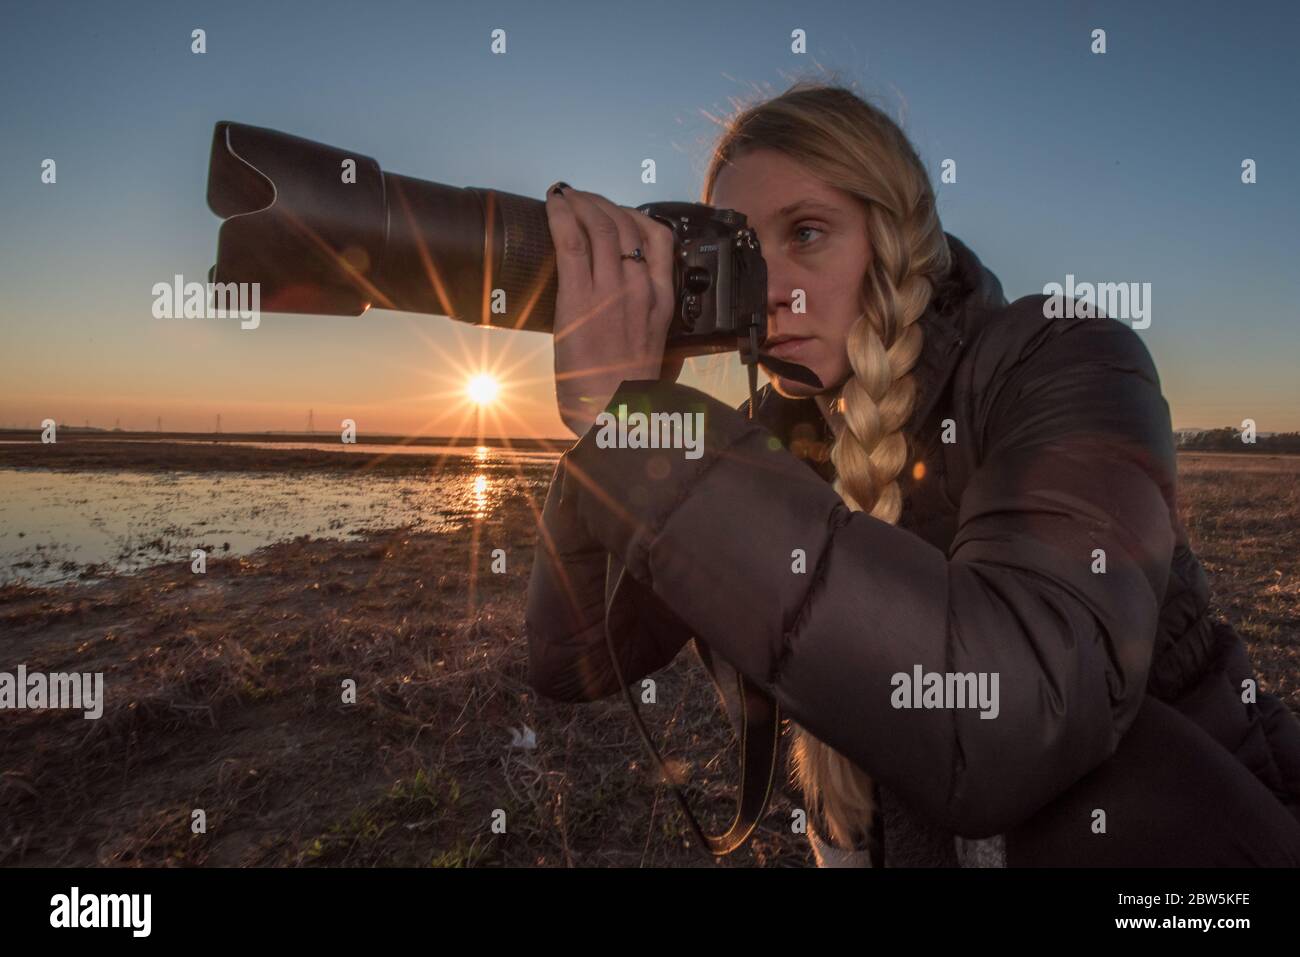 A female wildlife photographer poised with her camera taking photos during the golden hour as the sun sets in the distance. Stock Photo